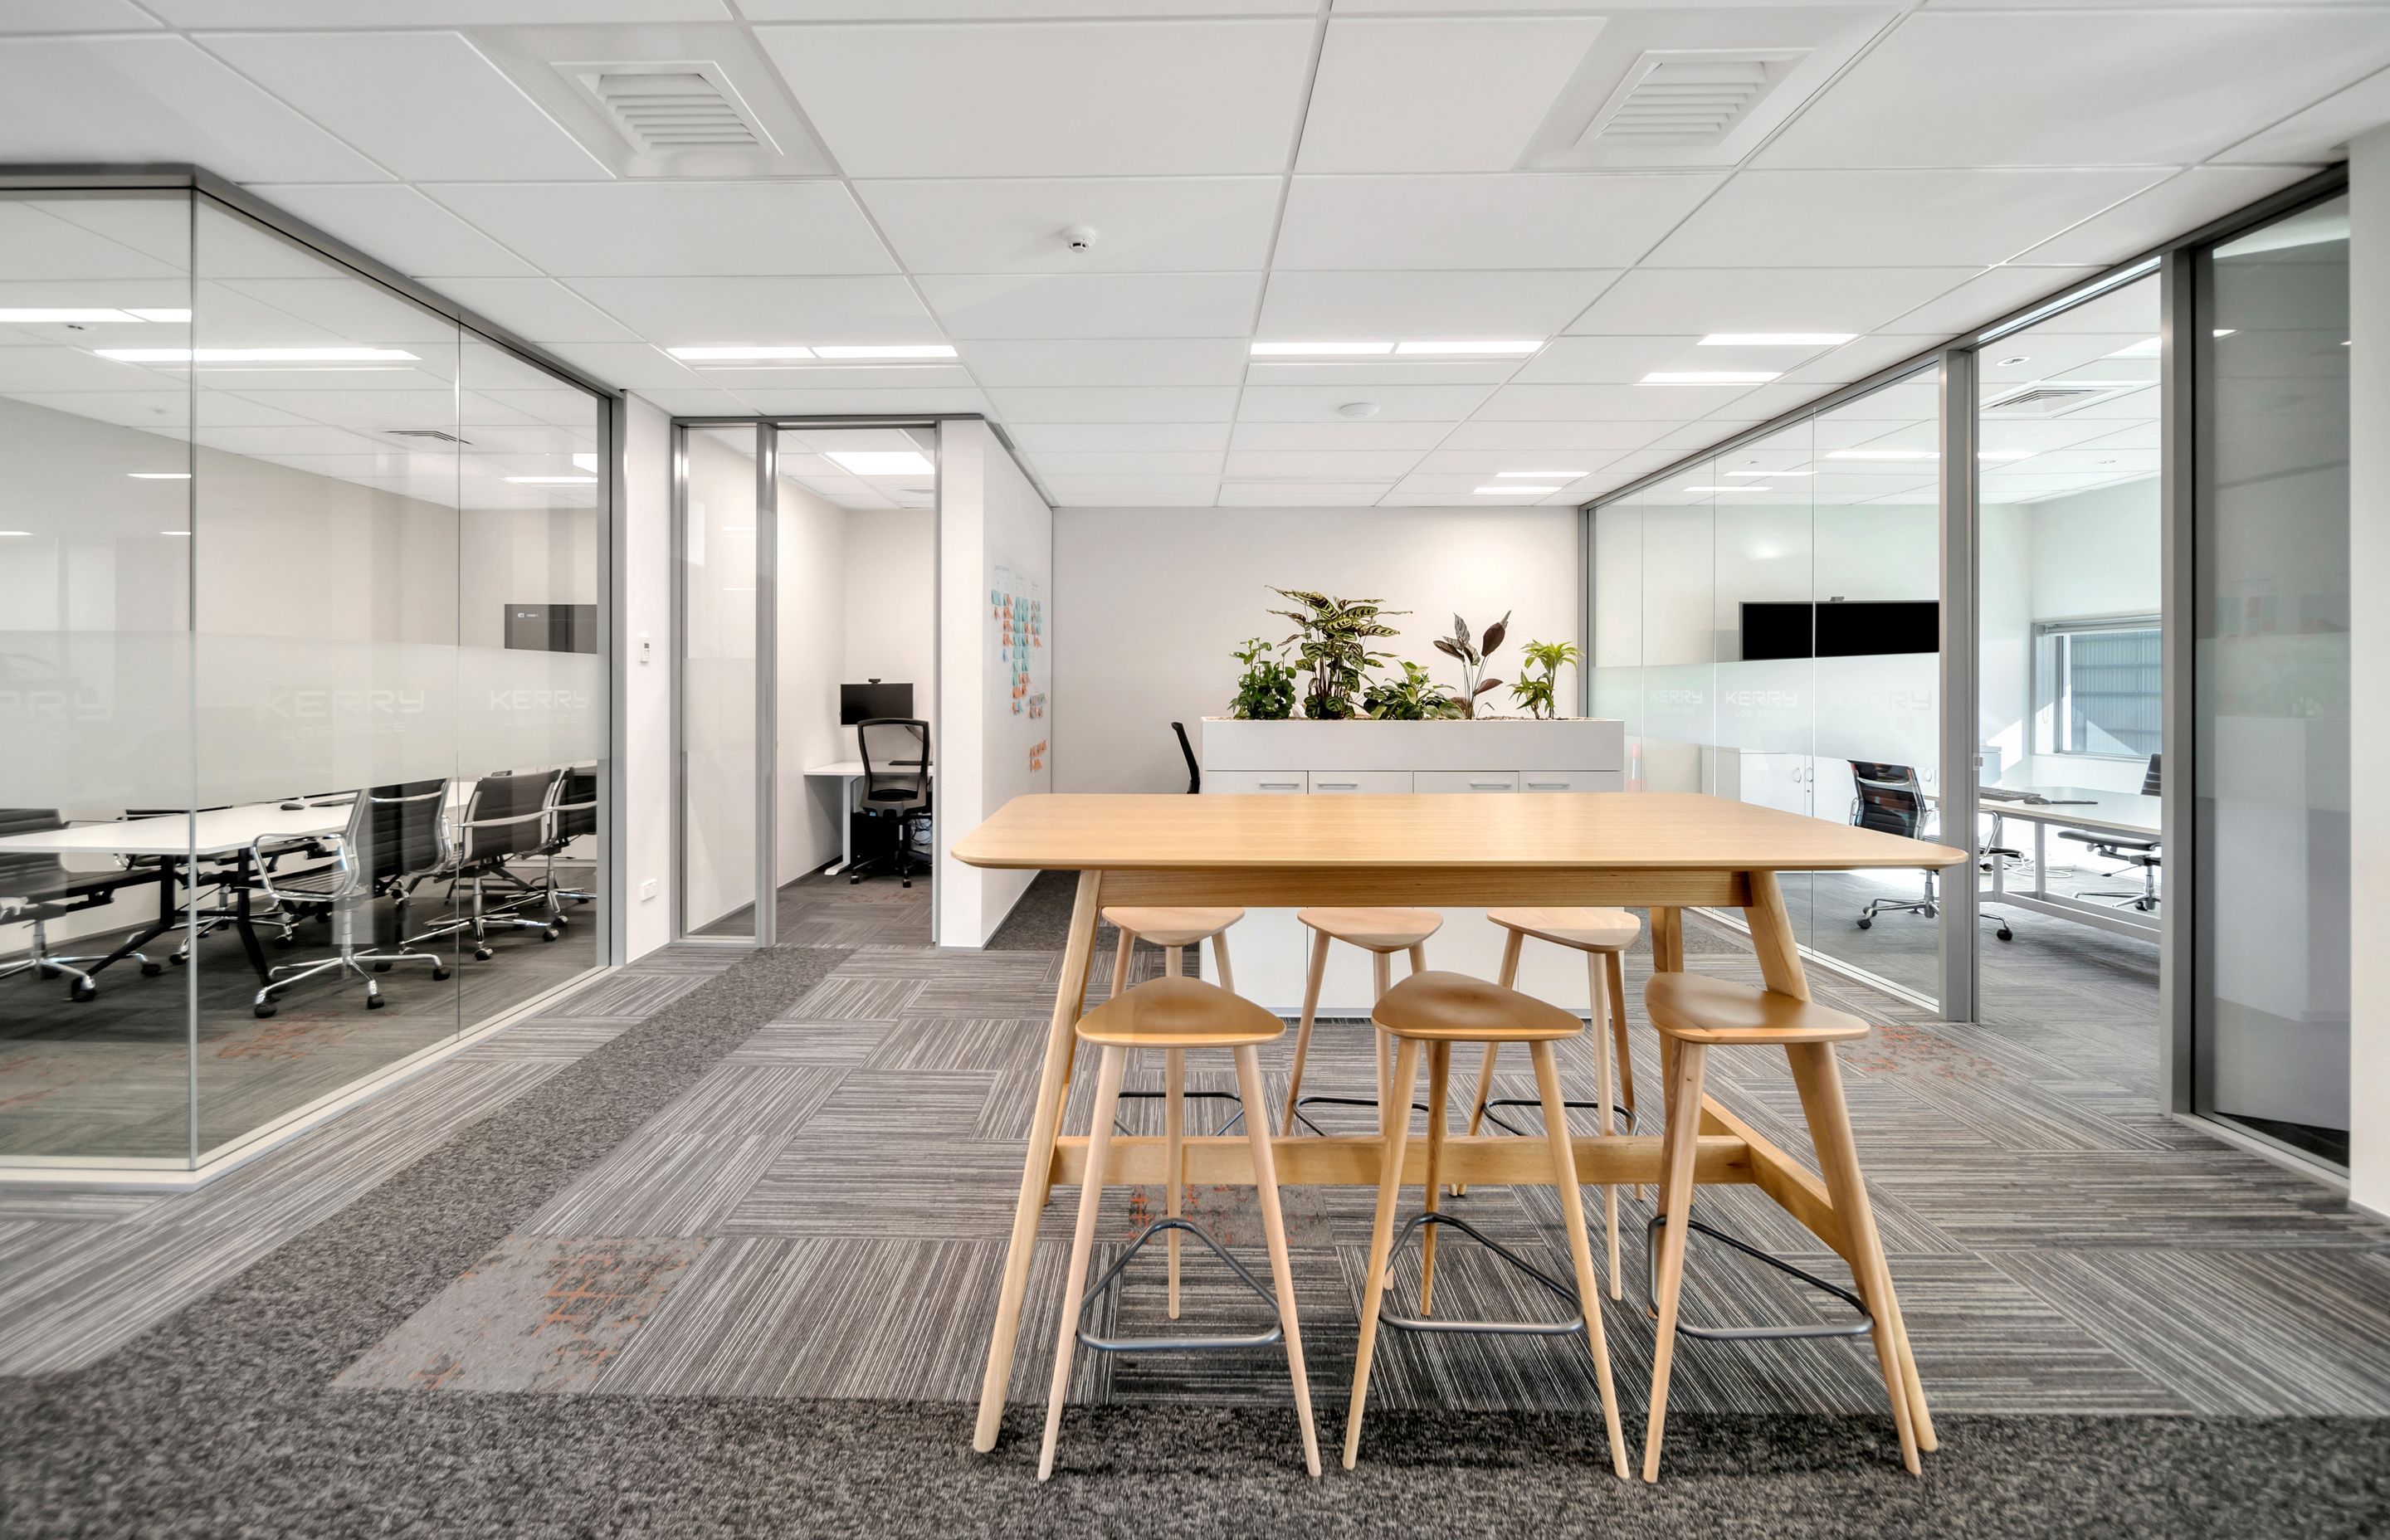 Offices are increasingly becoming more open and non-hierarchical.